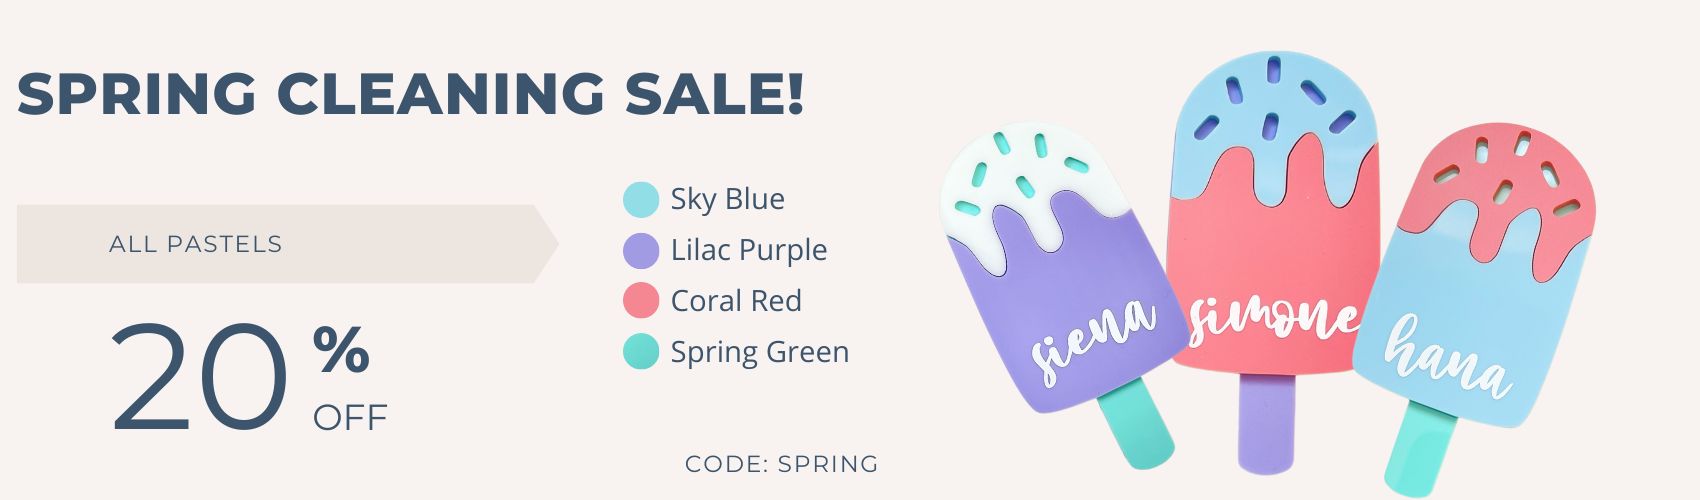 Spring Cleaning Sale 2